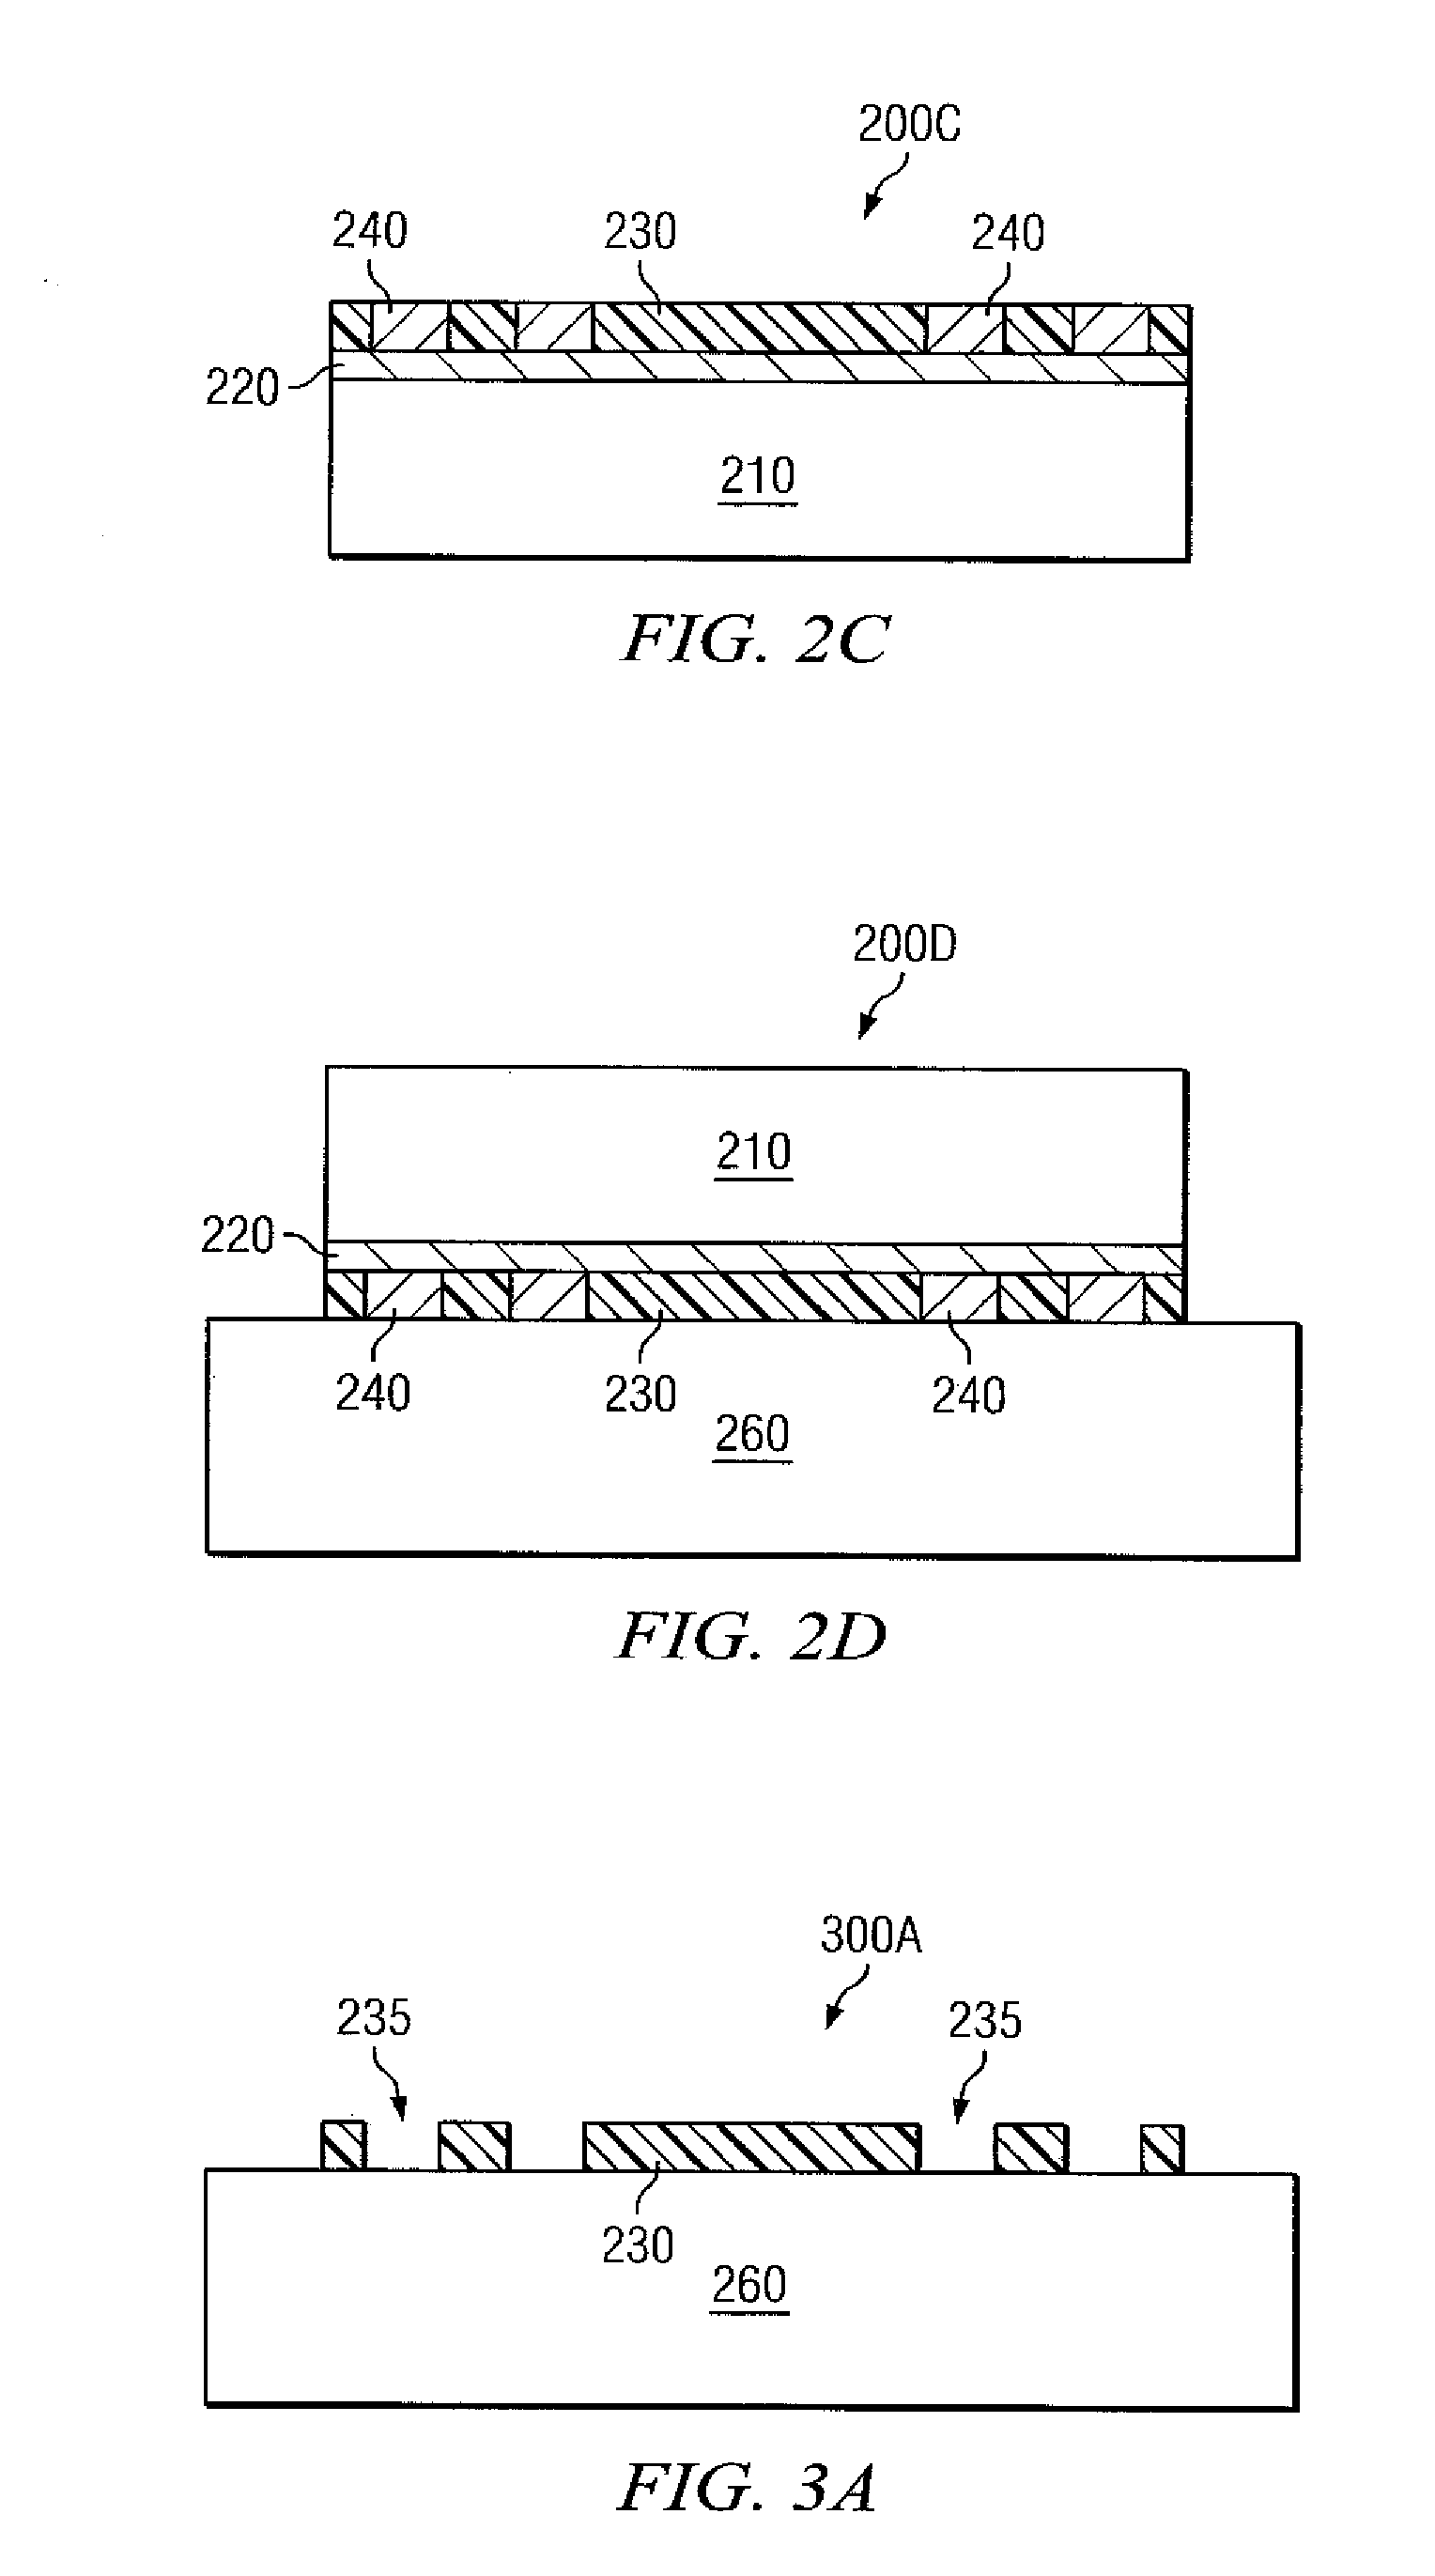 Low-cost flip-chip interconnect with an integrated wafer-applied photo-sensitive adhesive and metal-loaded epoxy paste system